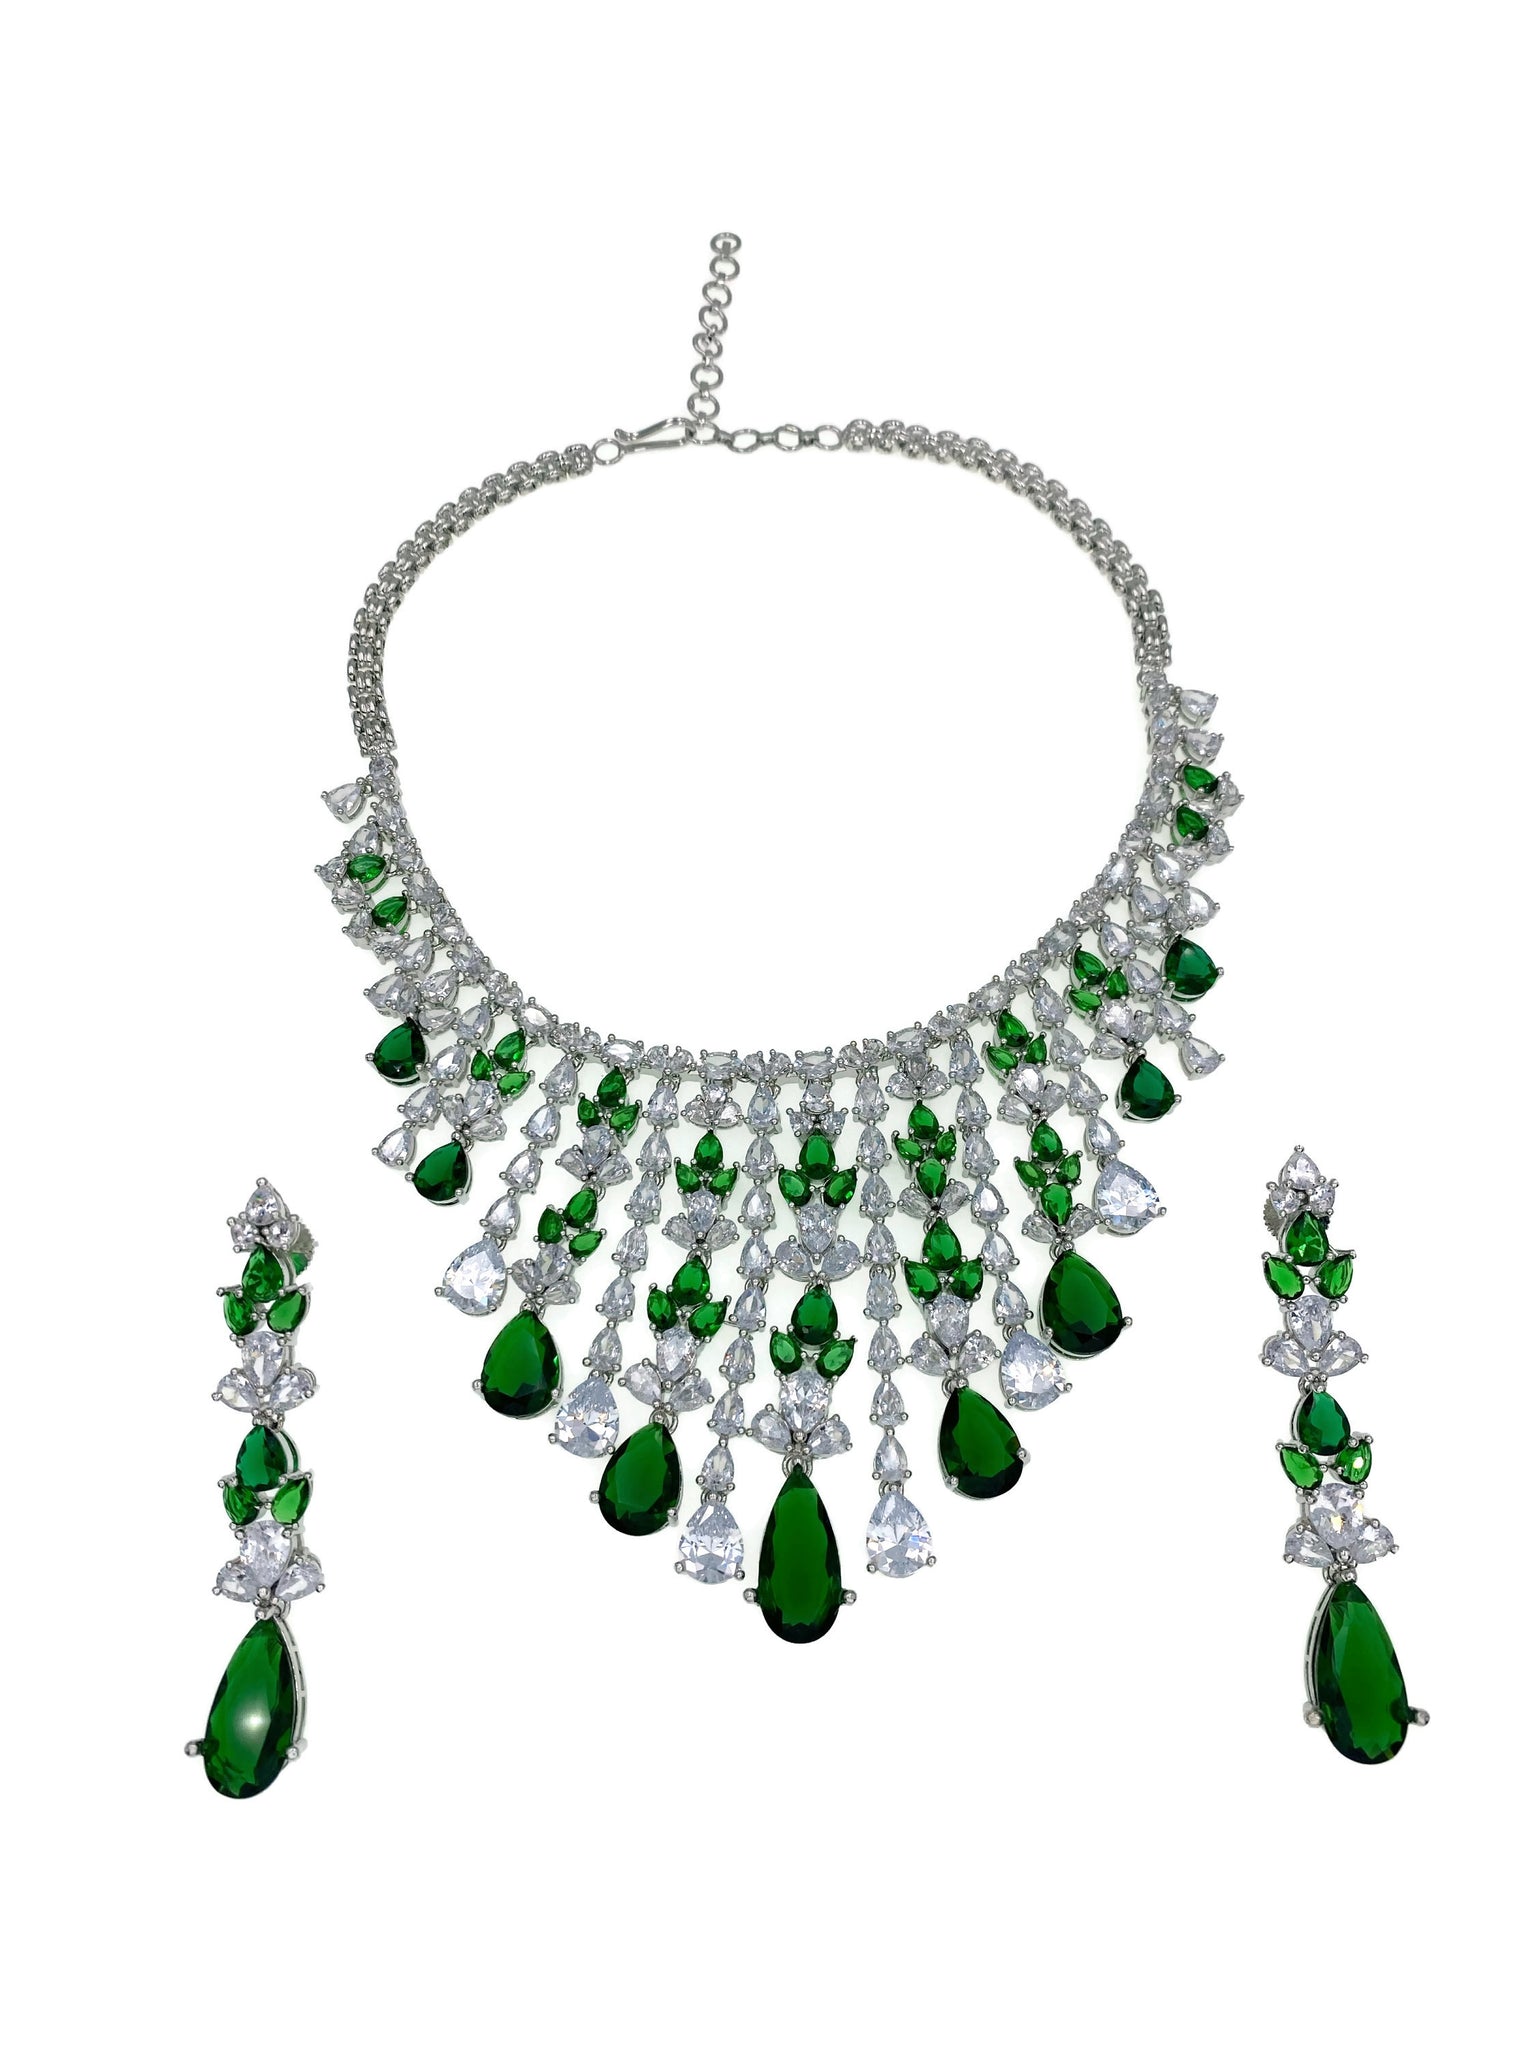 Emerald Diamondesque Cascading Jewels Necklace and Earrings full view